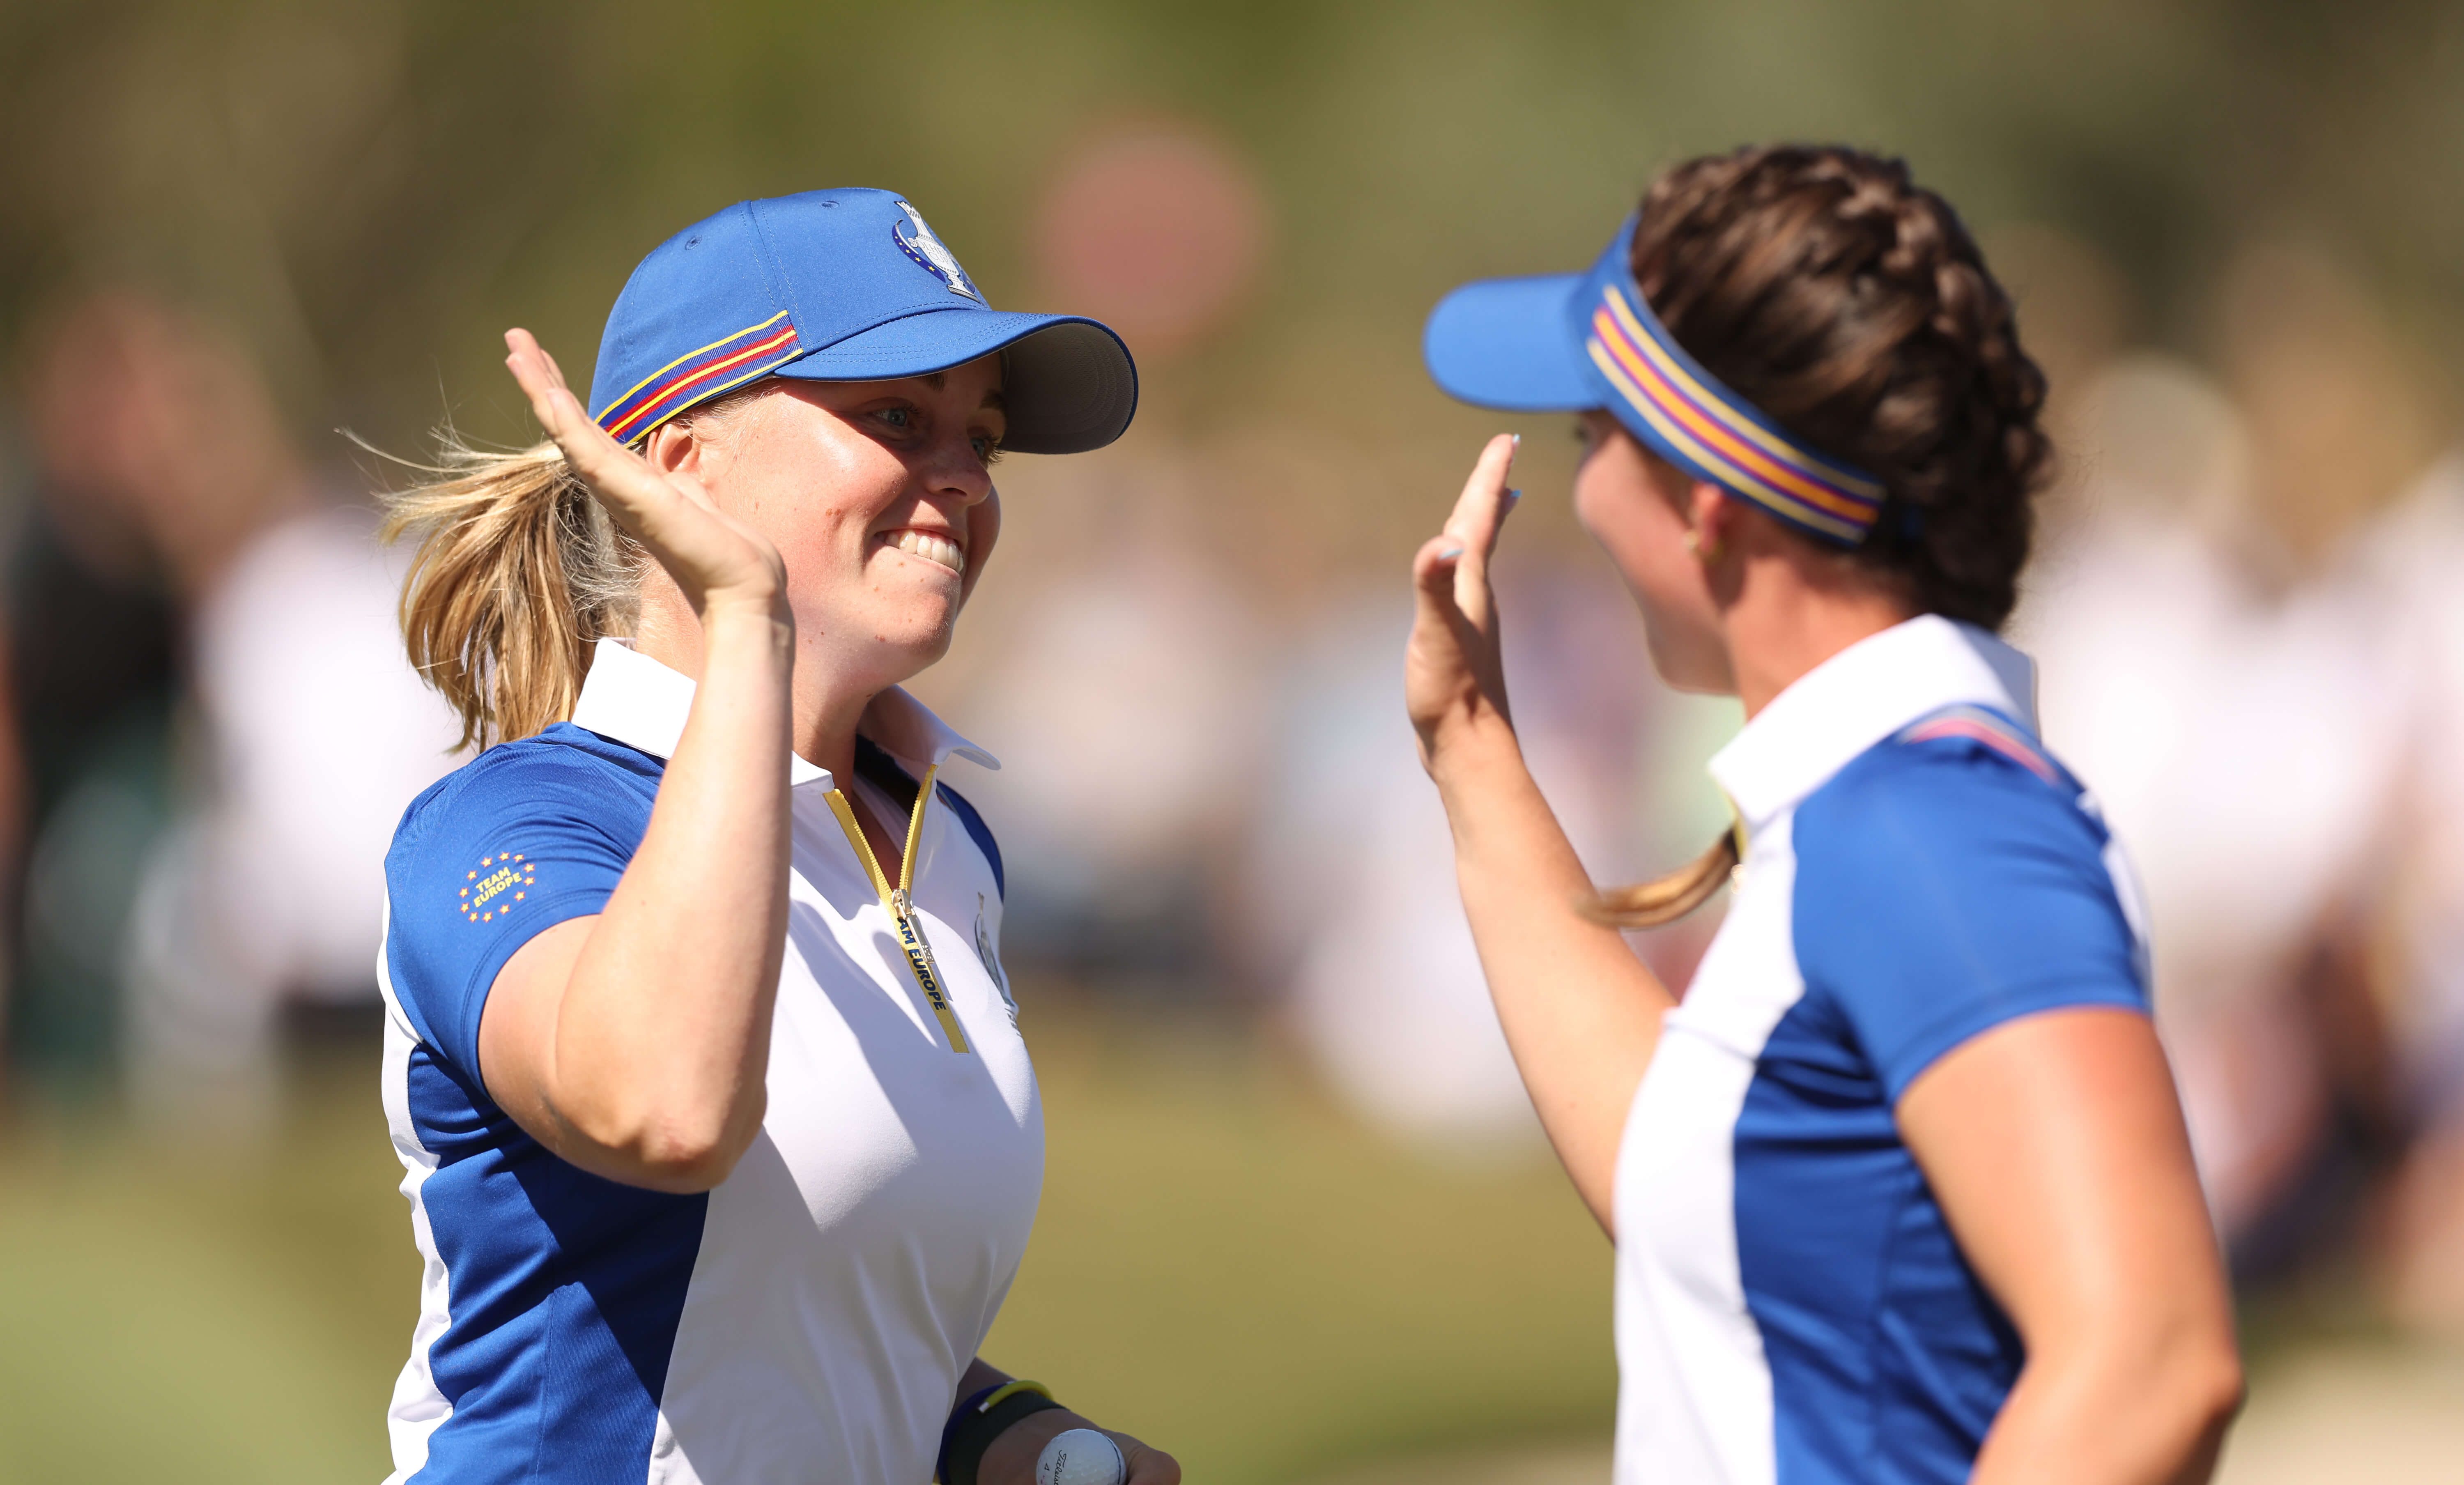 23/09/2023. Ladies European Tour. The Solheim Cup 2023, Finca Cortesin, Malaga Spain. 22-24 September. Linn Grant of Team Europe celebrates winning her match on the 18th hole during morning foursomes on day two. Credit: Oisin Keniry / LET